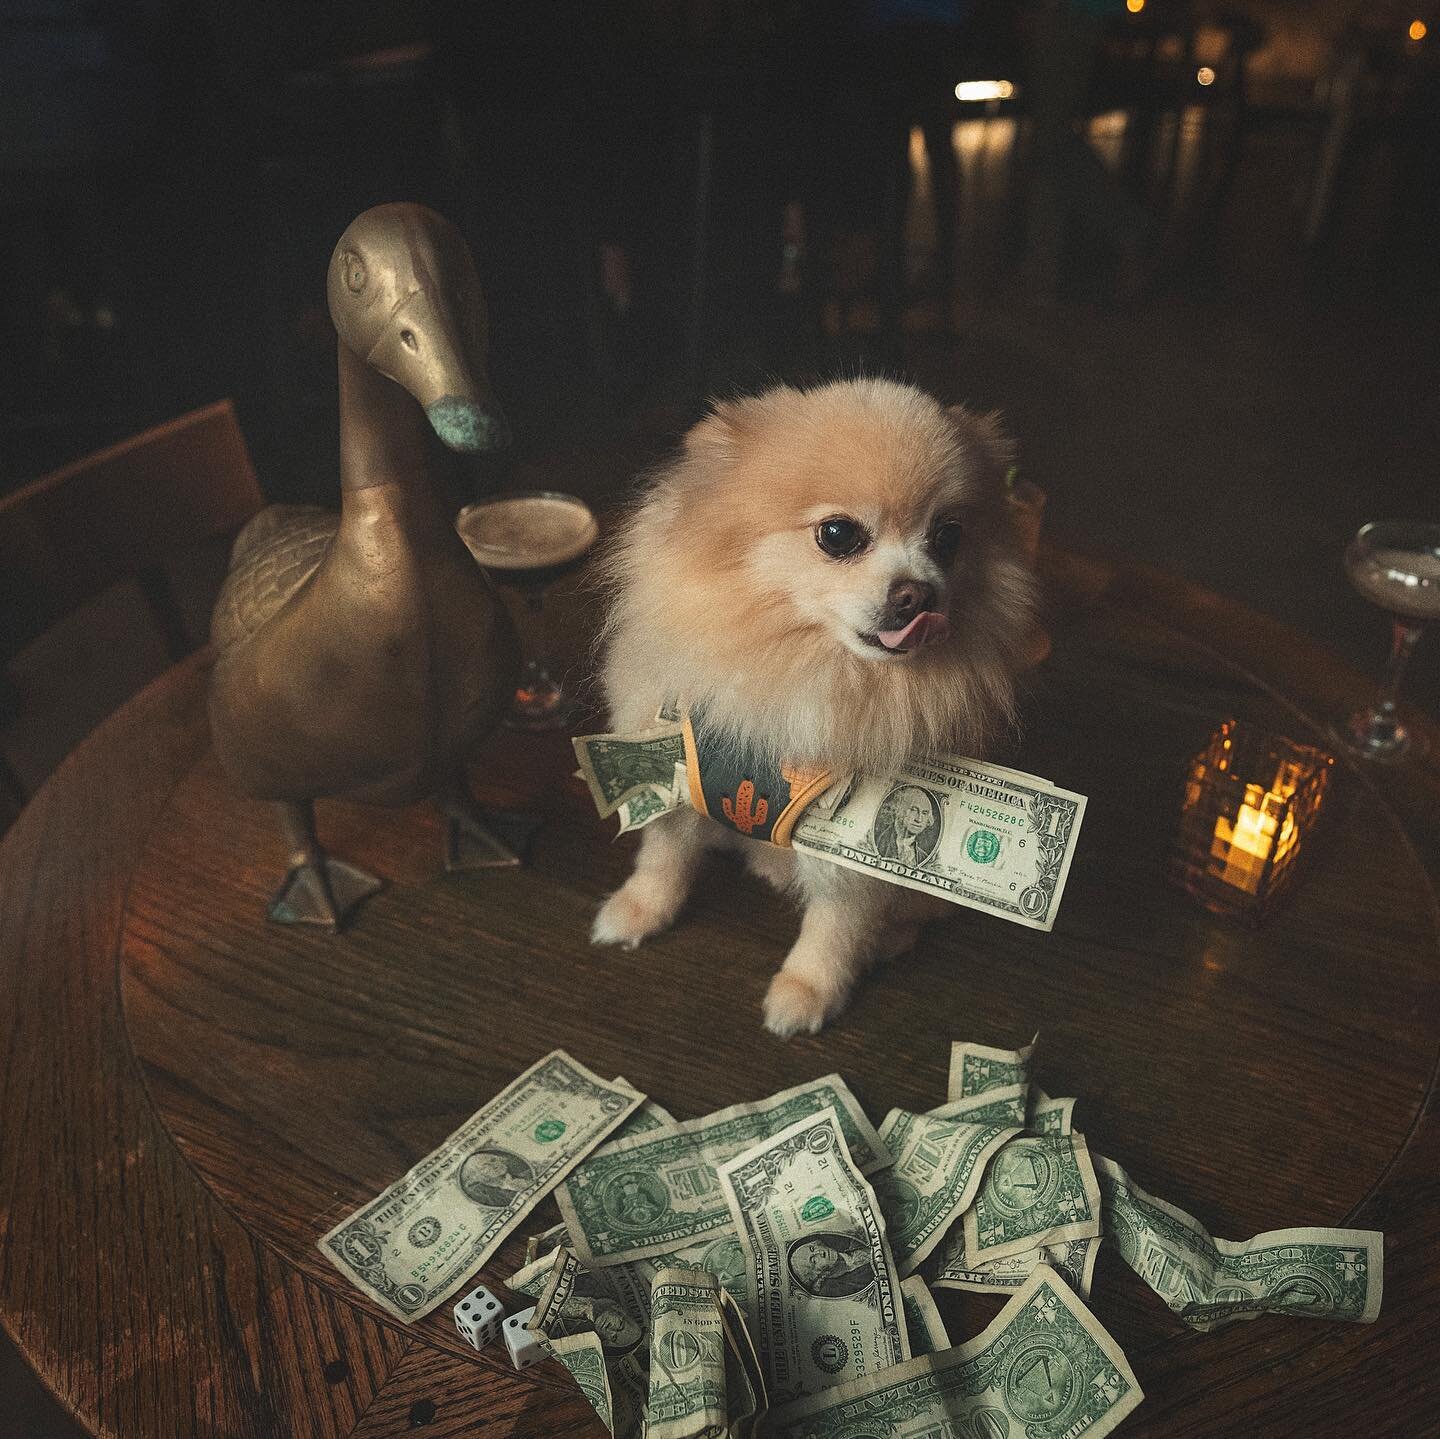 Goose!!! Lay off the espresso martinis! WTH. 

&hellip;

@dawsonproductions 
#78704 
#espressomartini 
#espressomartinis 
#southaustin 
#cocktailparty 
#southlamar 
#getloose
#thegoldengoose 
#atxlocalbusiness 
#atxlocal 
#pomeranianlovers 
#austinar